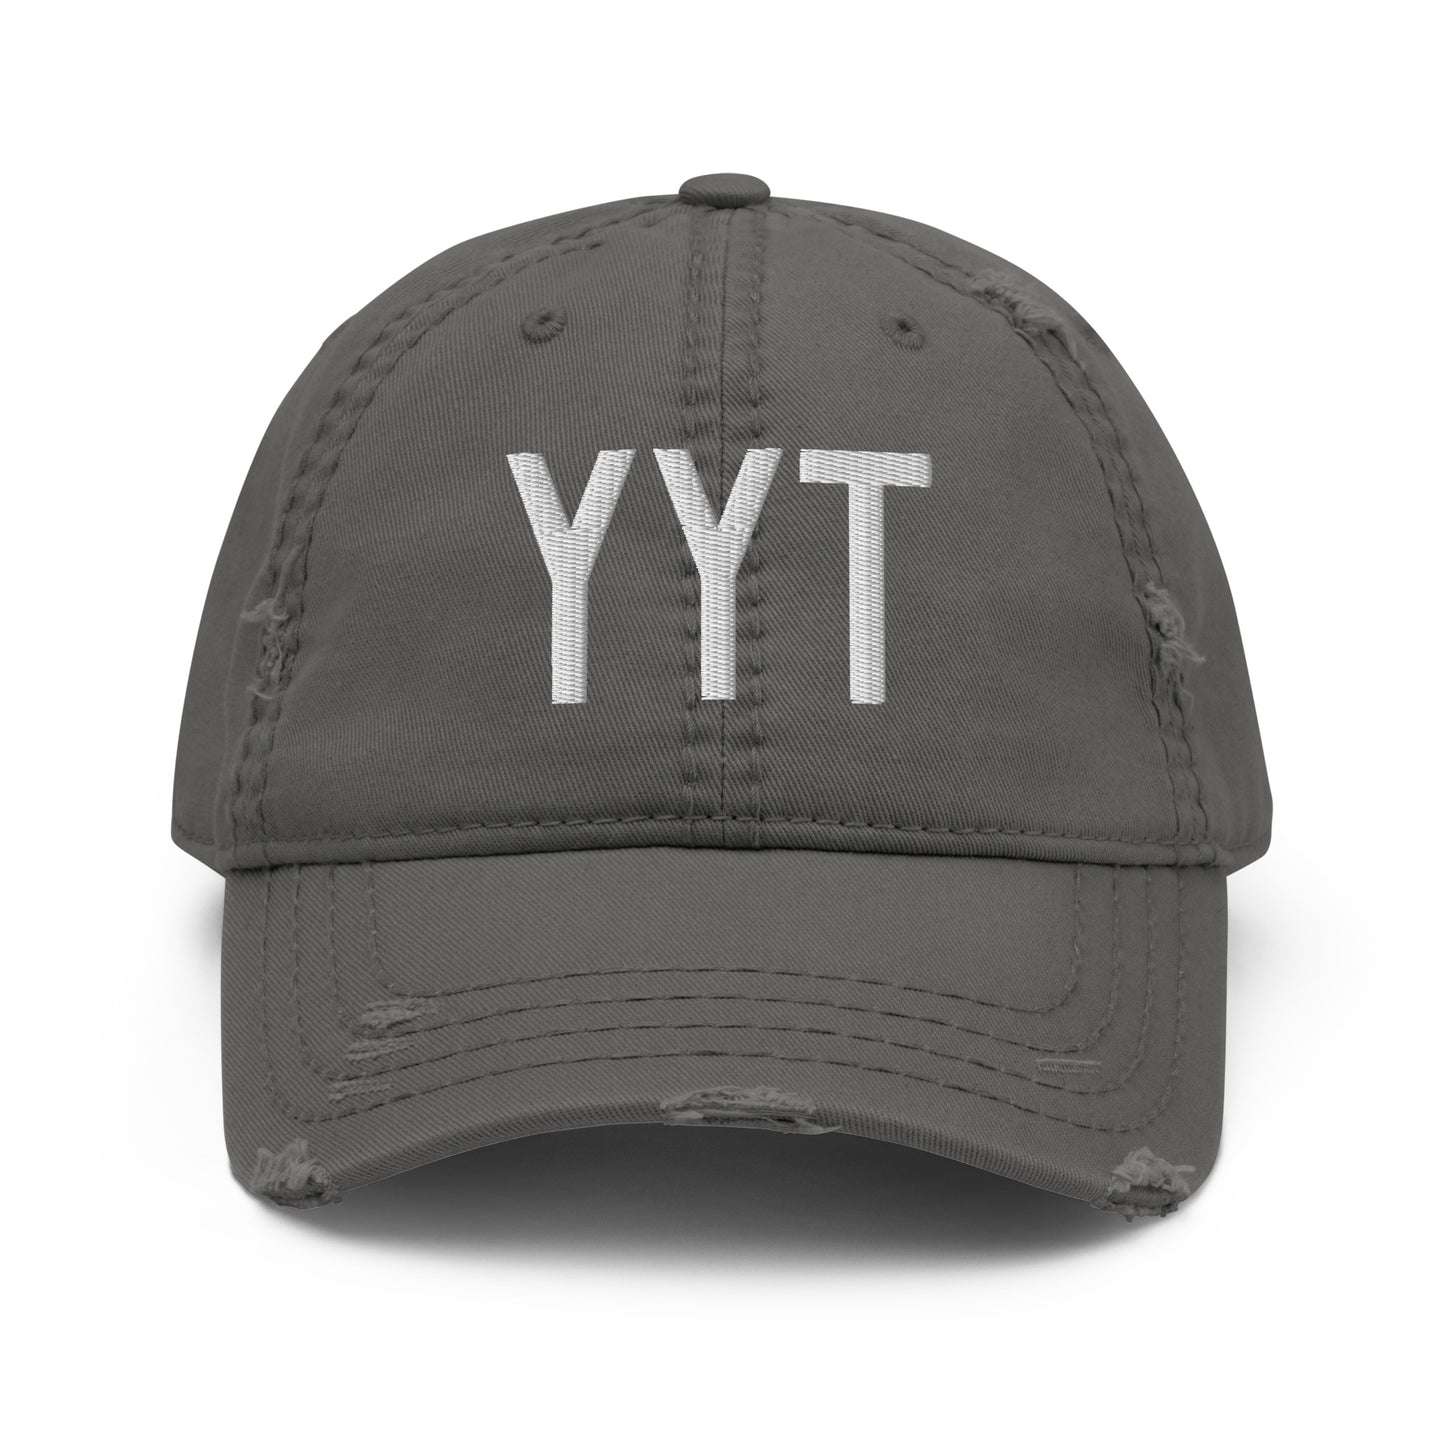 Airport Code Distressed Hat - White • YYT St. John's • YHM Designs - Image 15